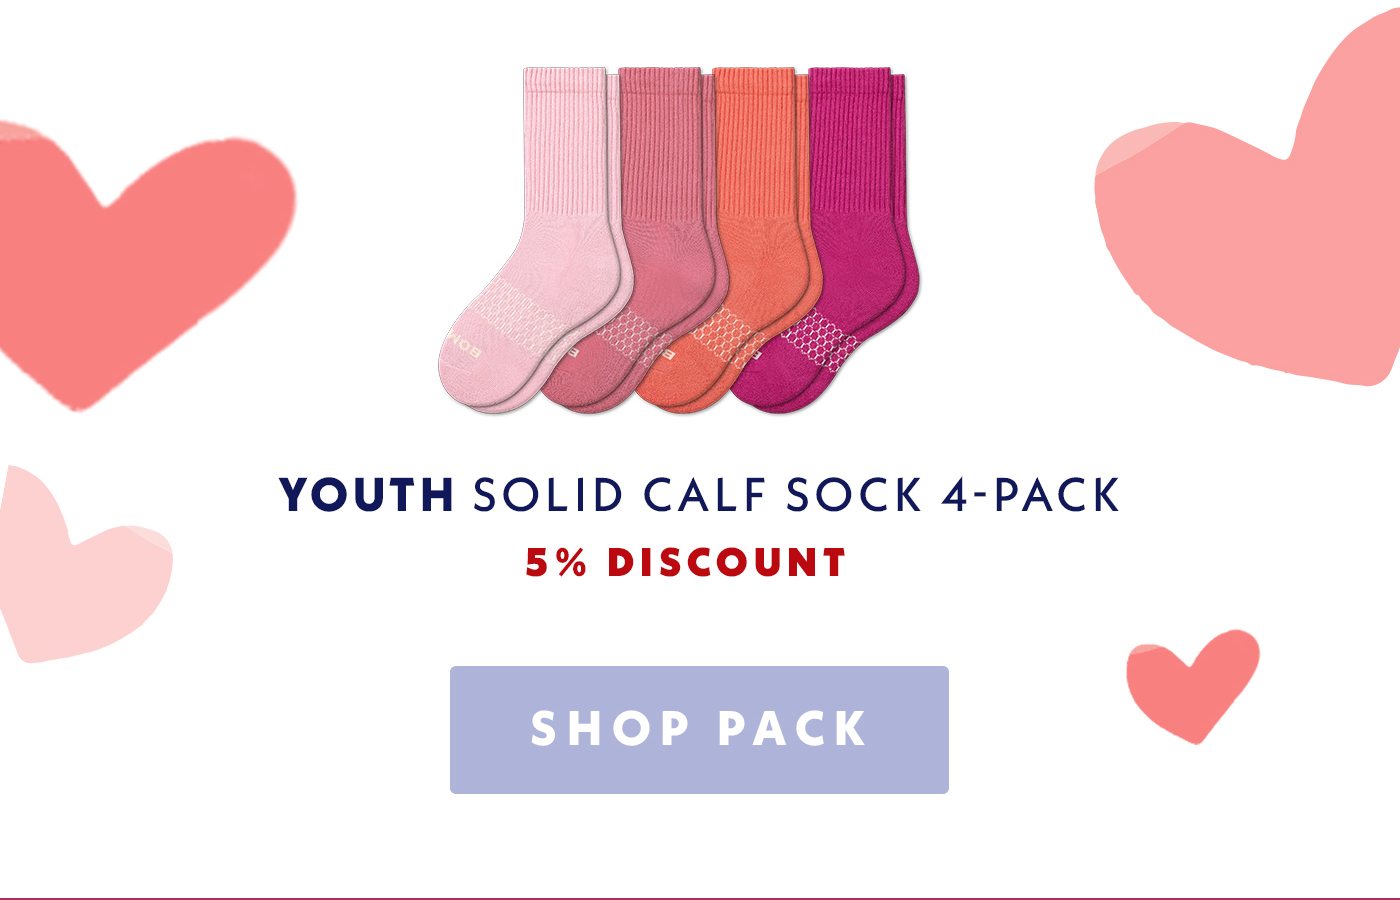 Youth Solid Calf Sock 4-Pack | 5% Discount | Shop Pack